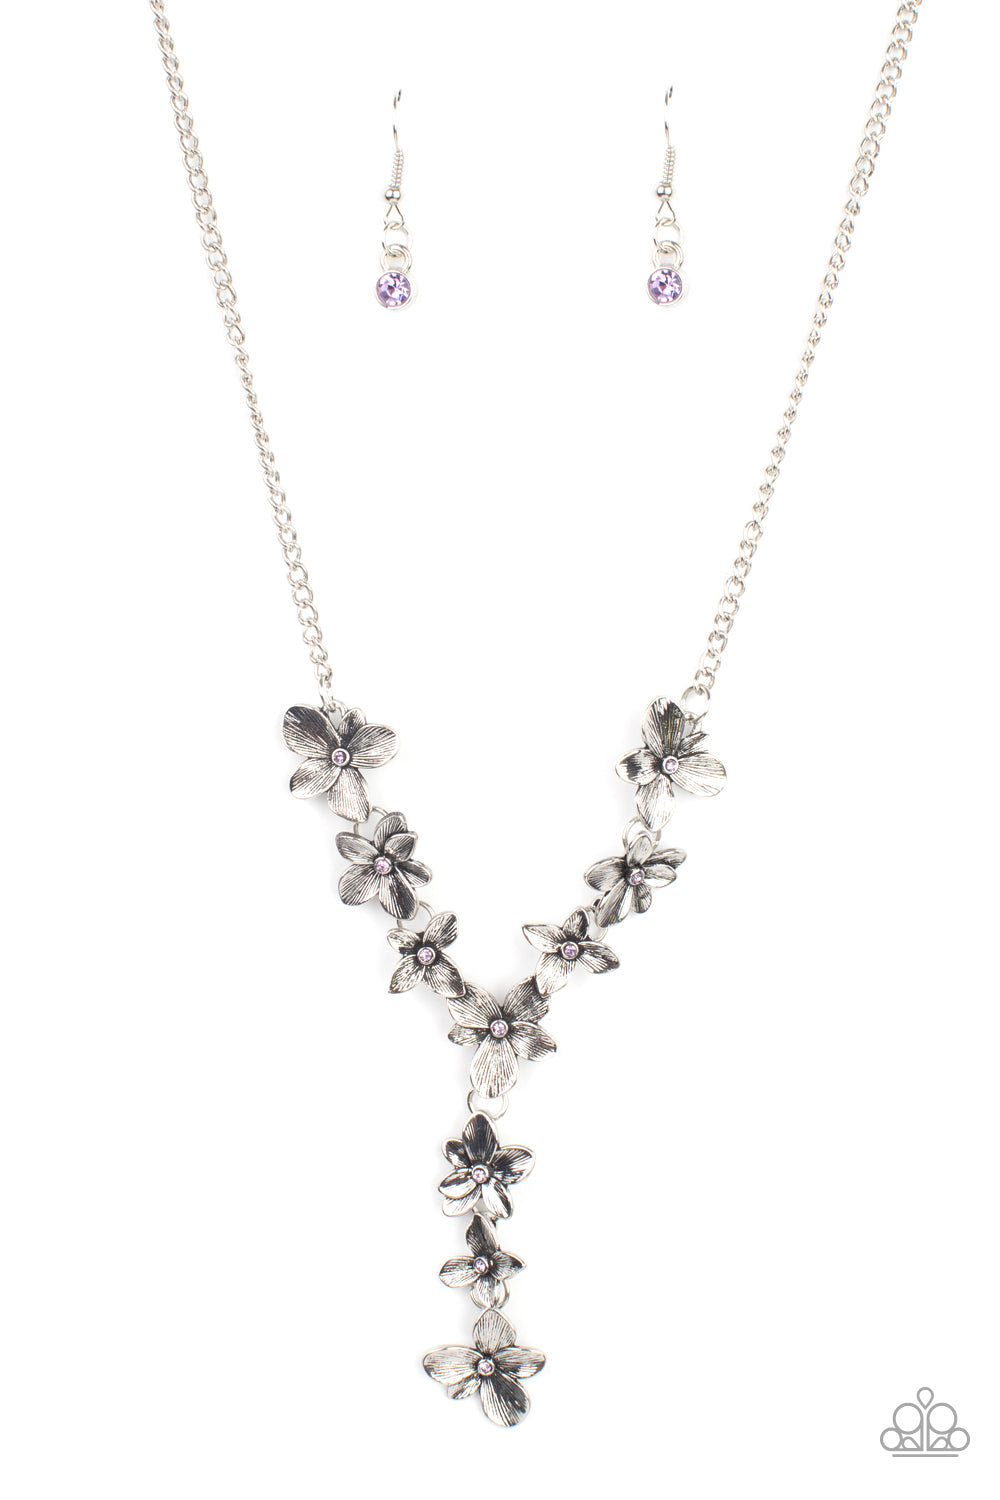 Fairytale Meadow Paparazzi Accessories Necklace with Earrings - Purple